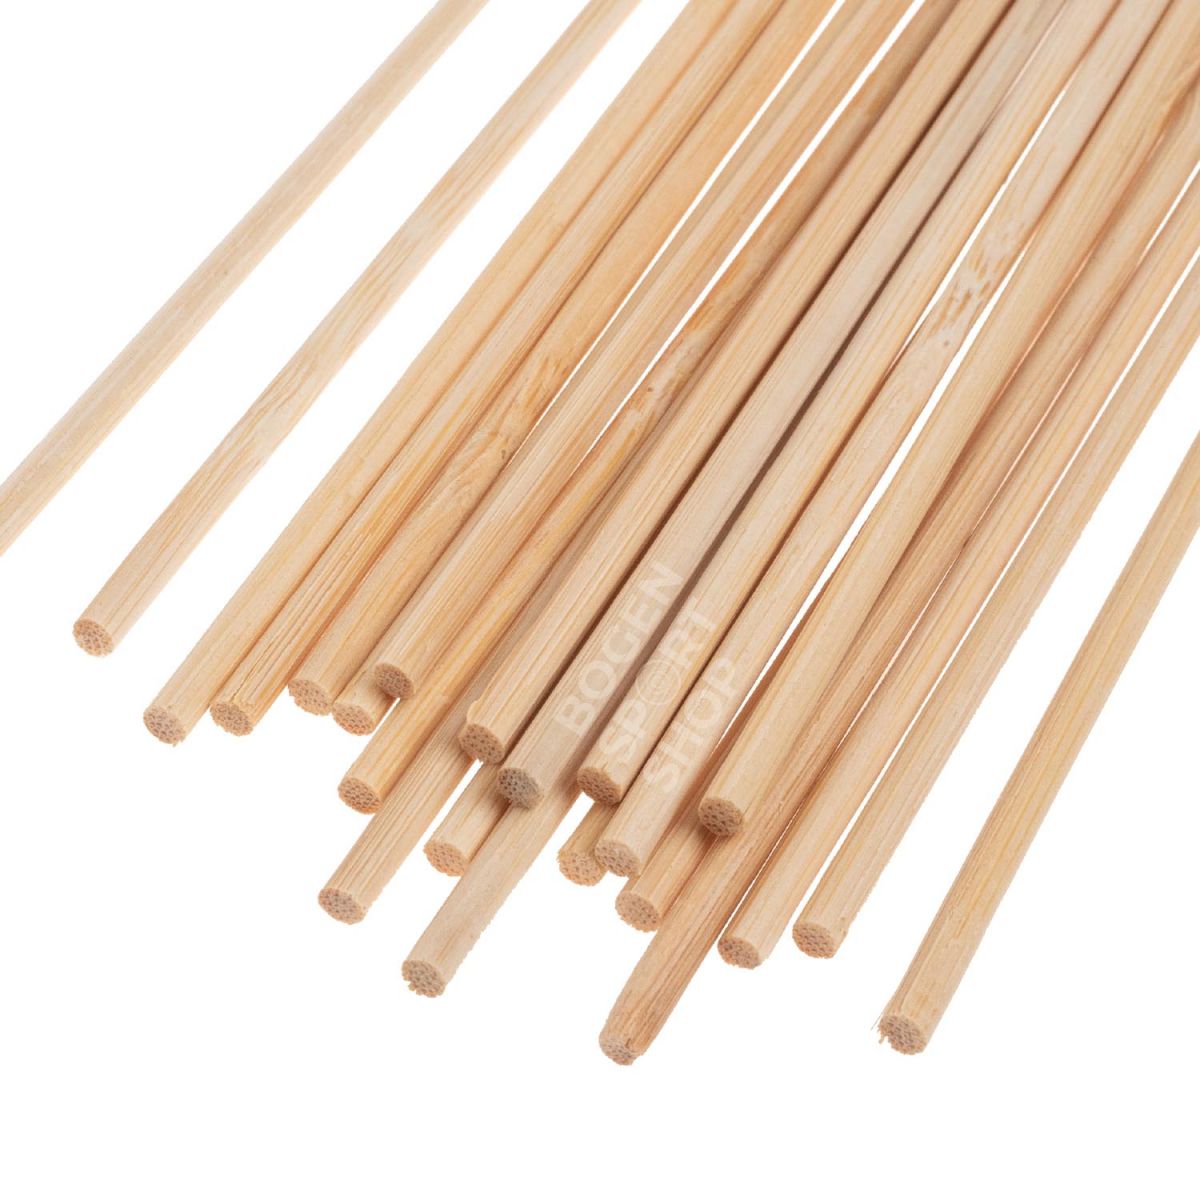 Alexbow Blowgun Bamboo Shafts 3 mm Pointed (50 Pcs.)